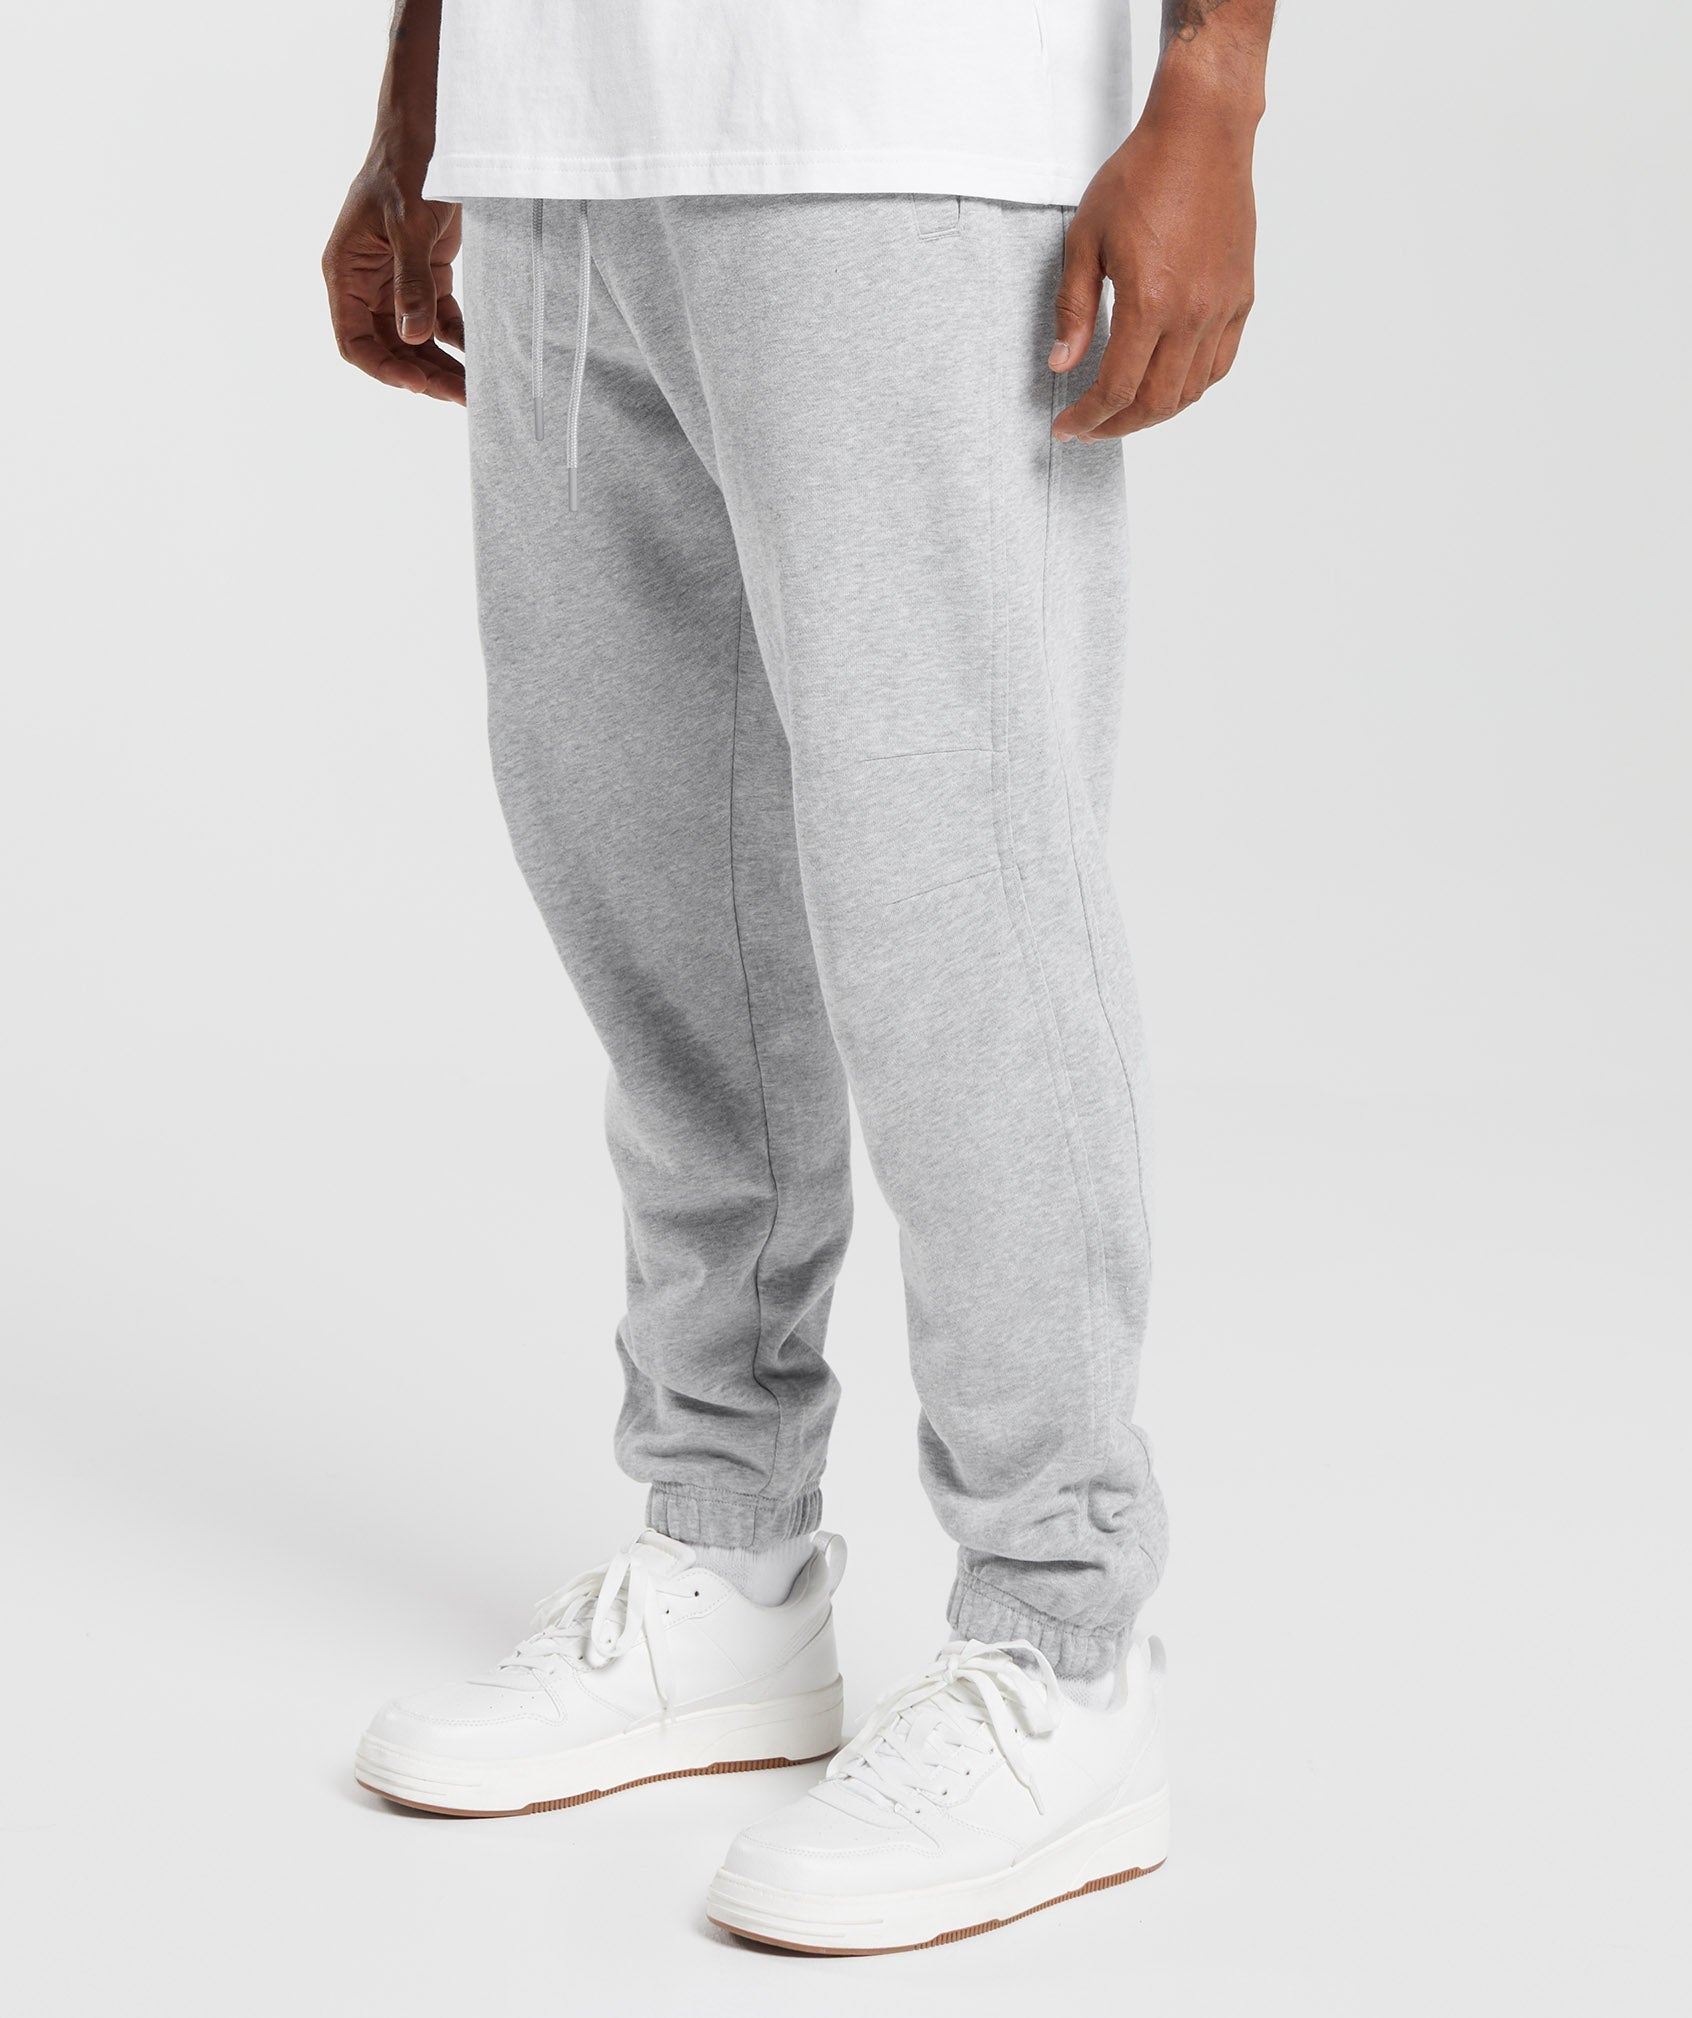 Rest Day Essentials Joggers in Light Grey Core Marl - view 3